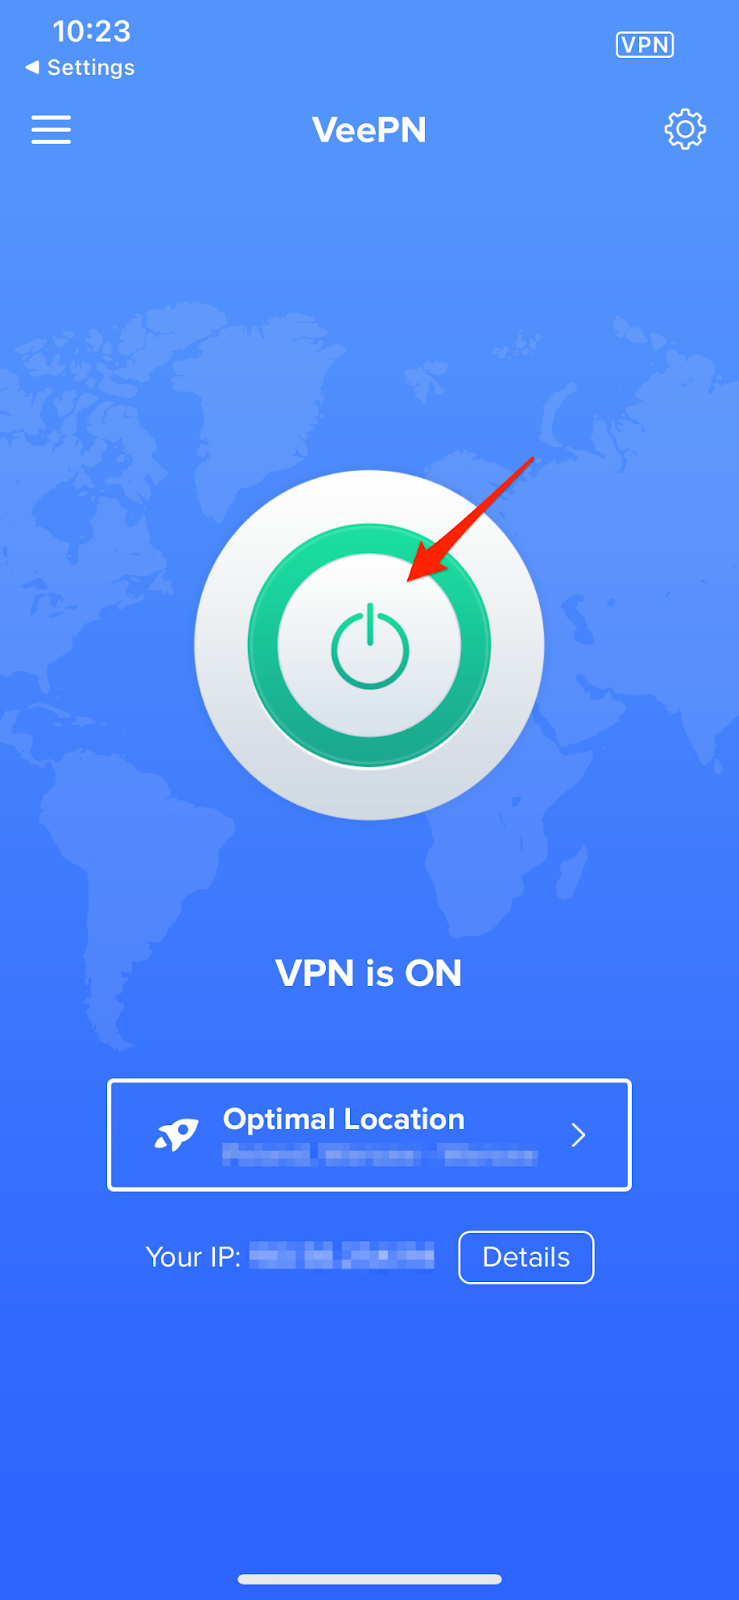 Turn your VPN on